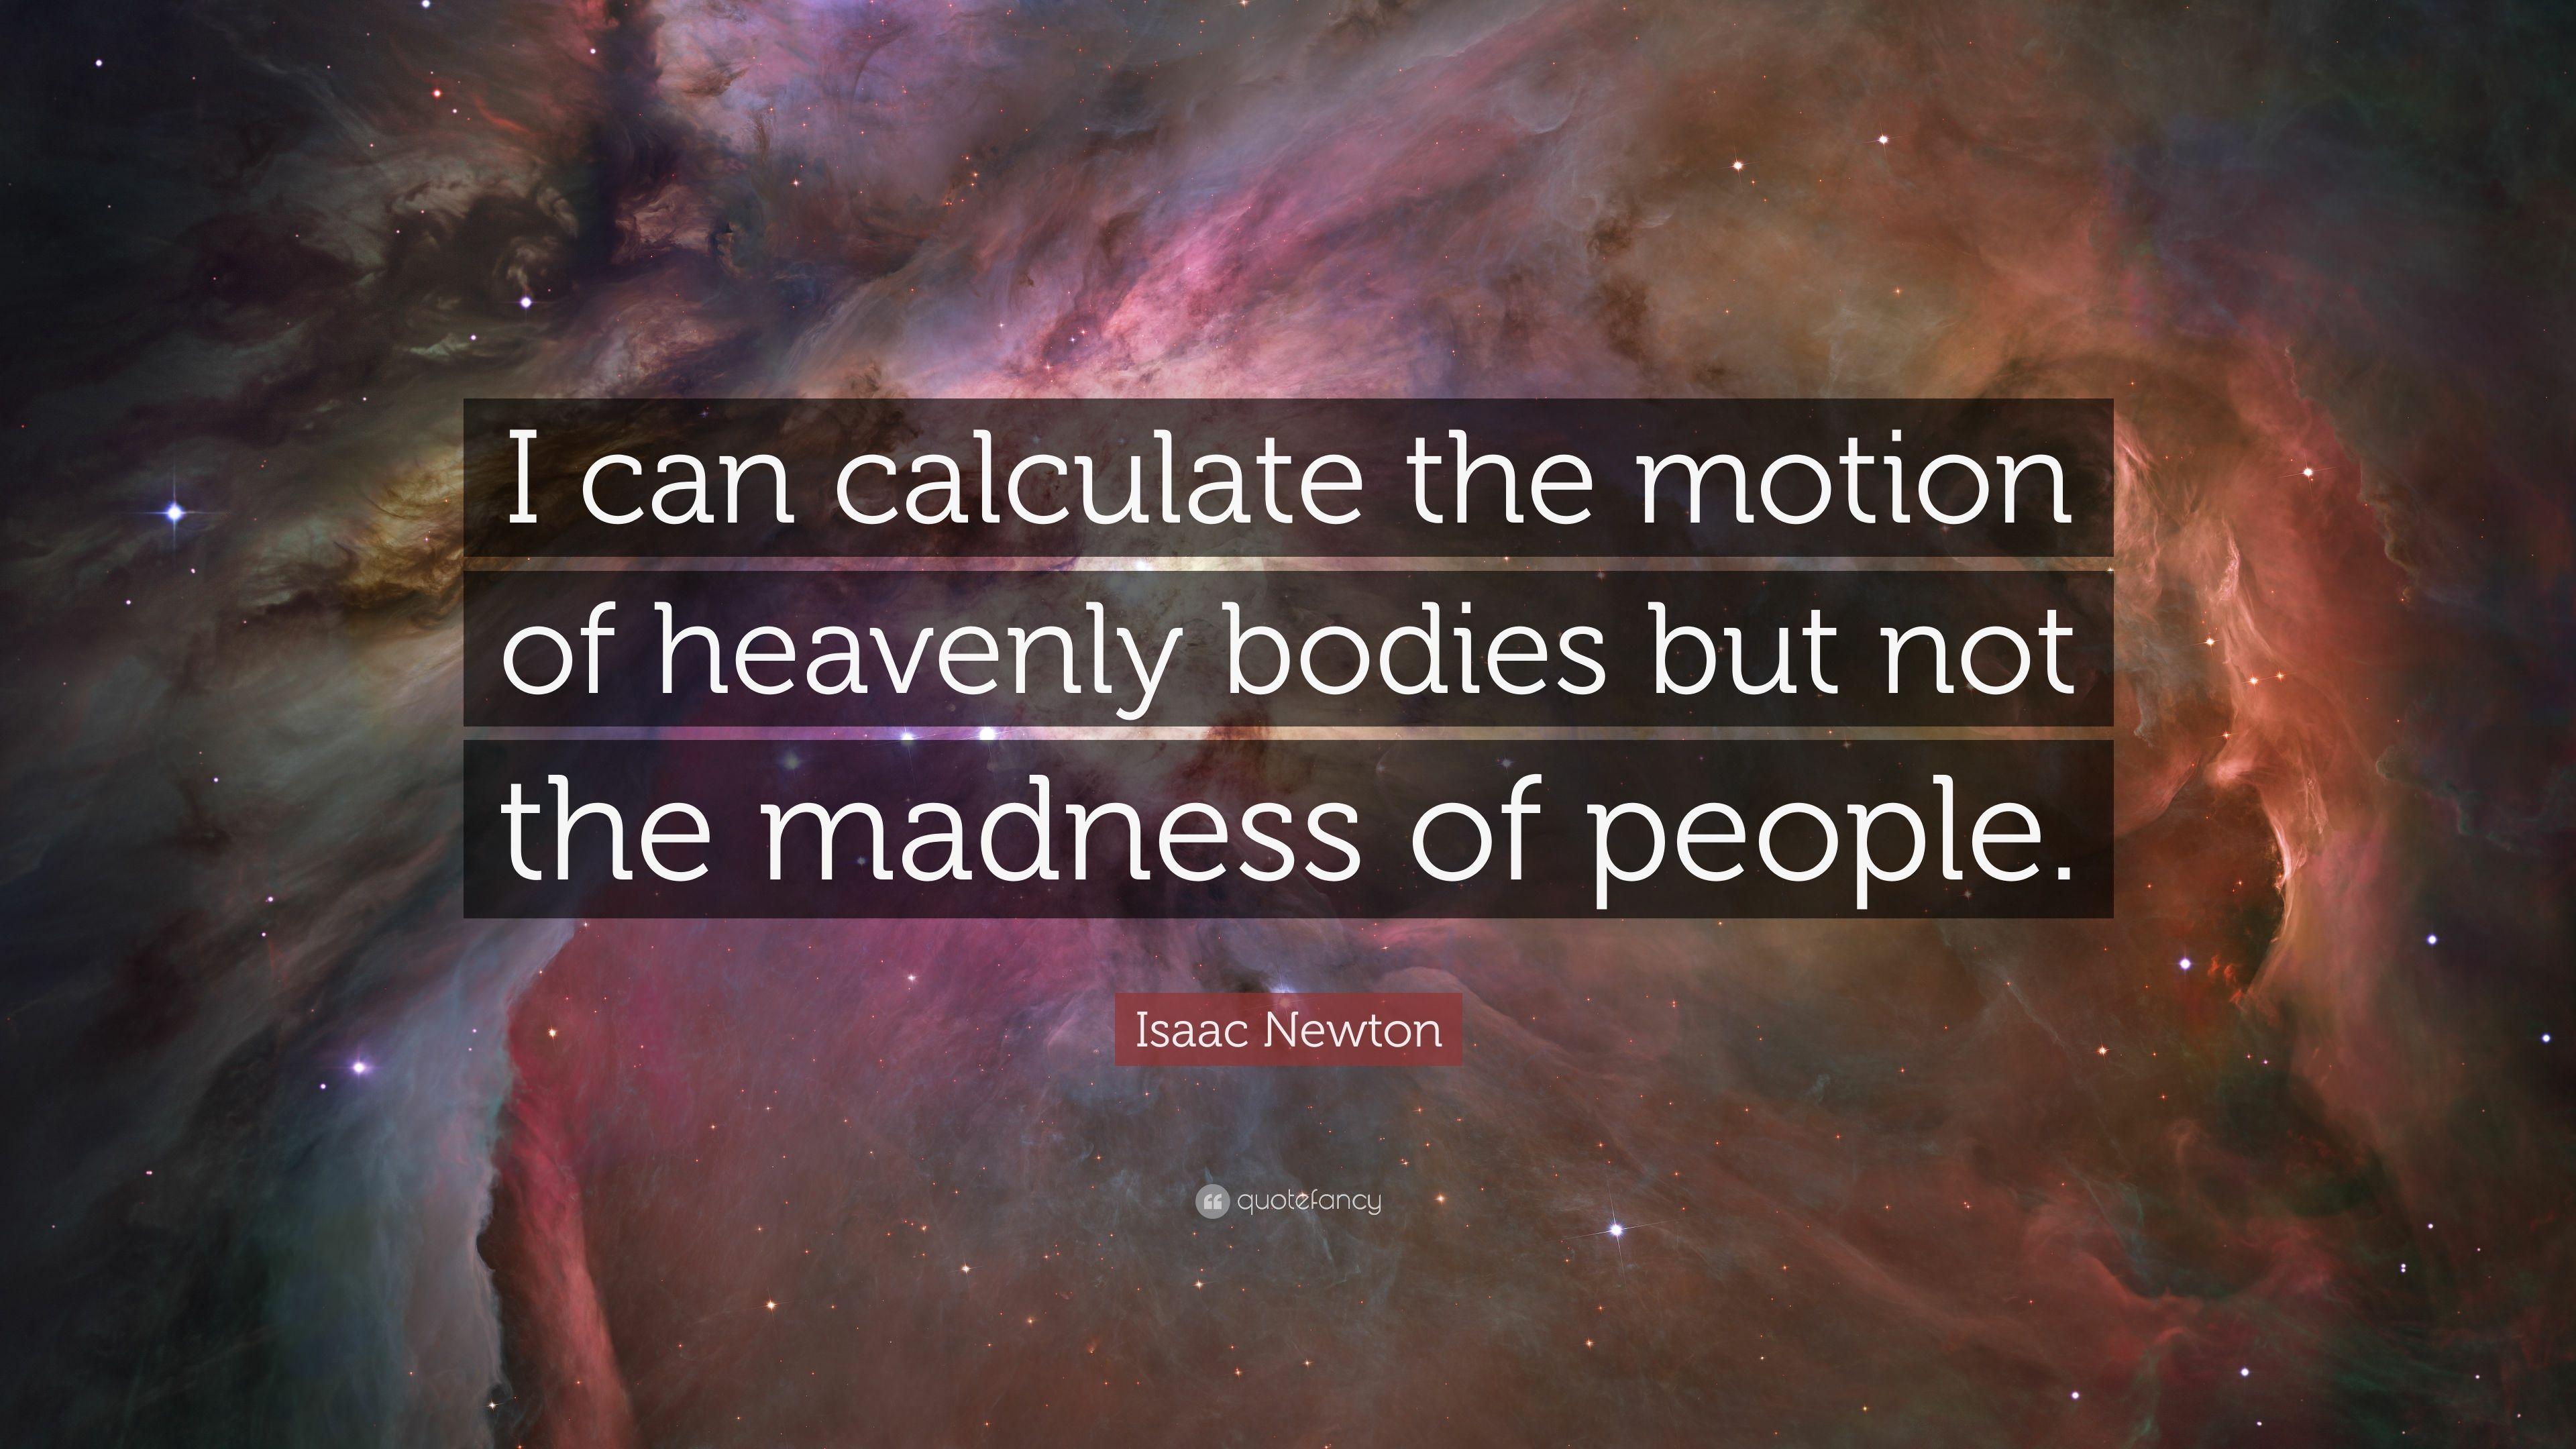 Isaac Newton Quote: “I can calculate the motion of heavenly bodies